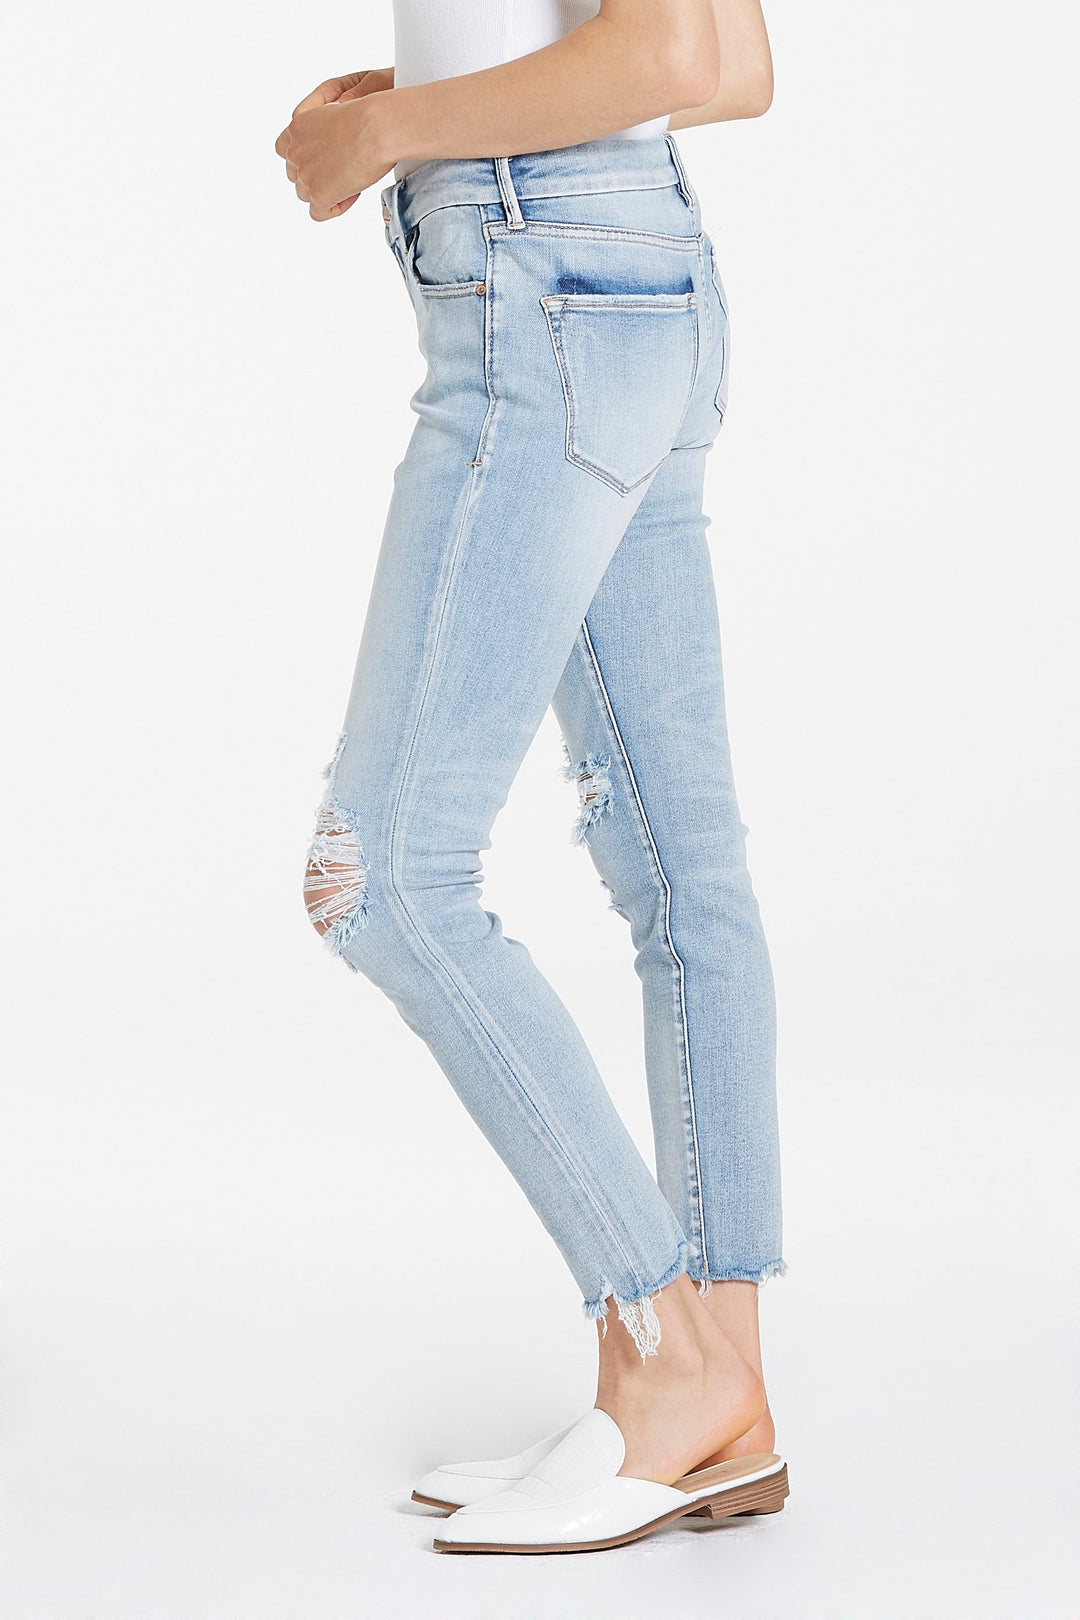 image of a female model wearing a JOYRICH MID RISE ANKLE SKINNY JEANS REEF BEACH JEANS